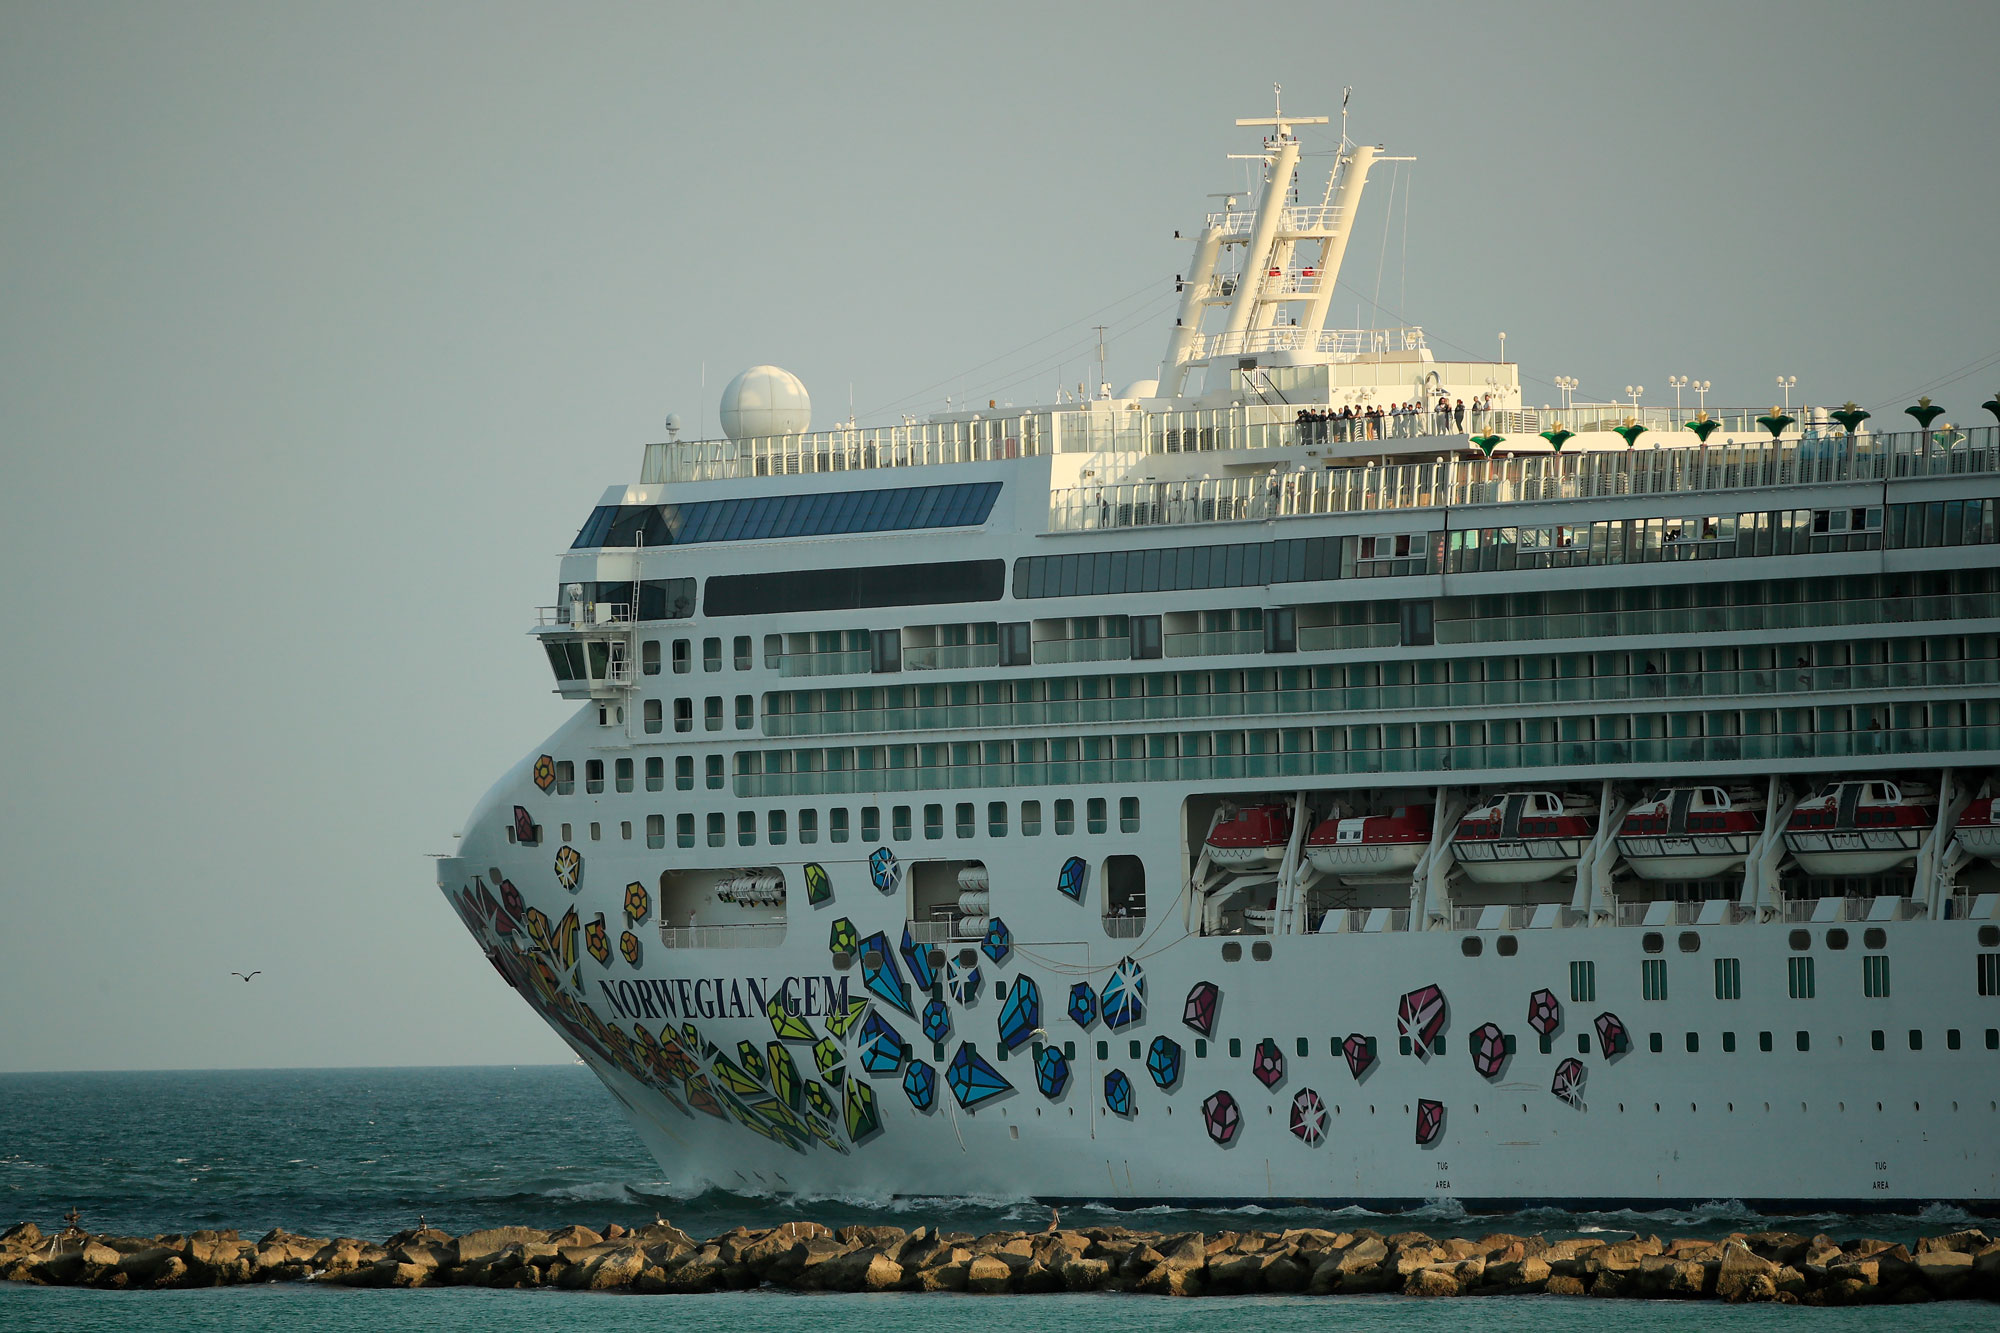 The Norwegian Gem cruise ship leaves the Port of Miami on April 14, in Miami Beach.